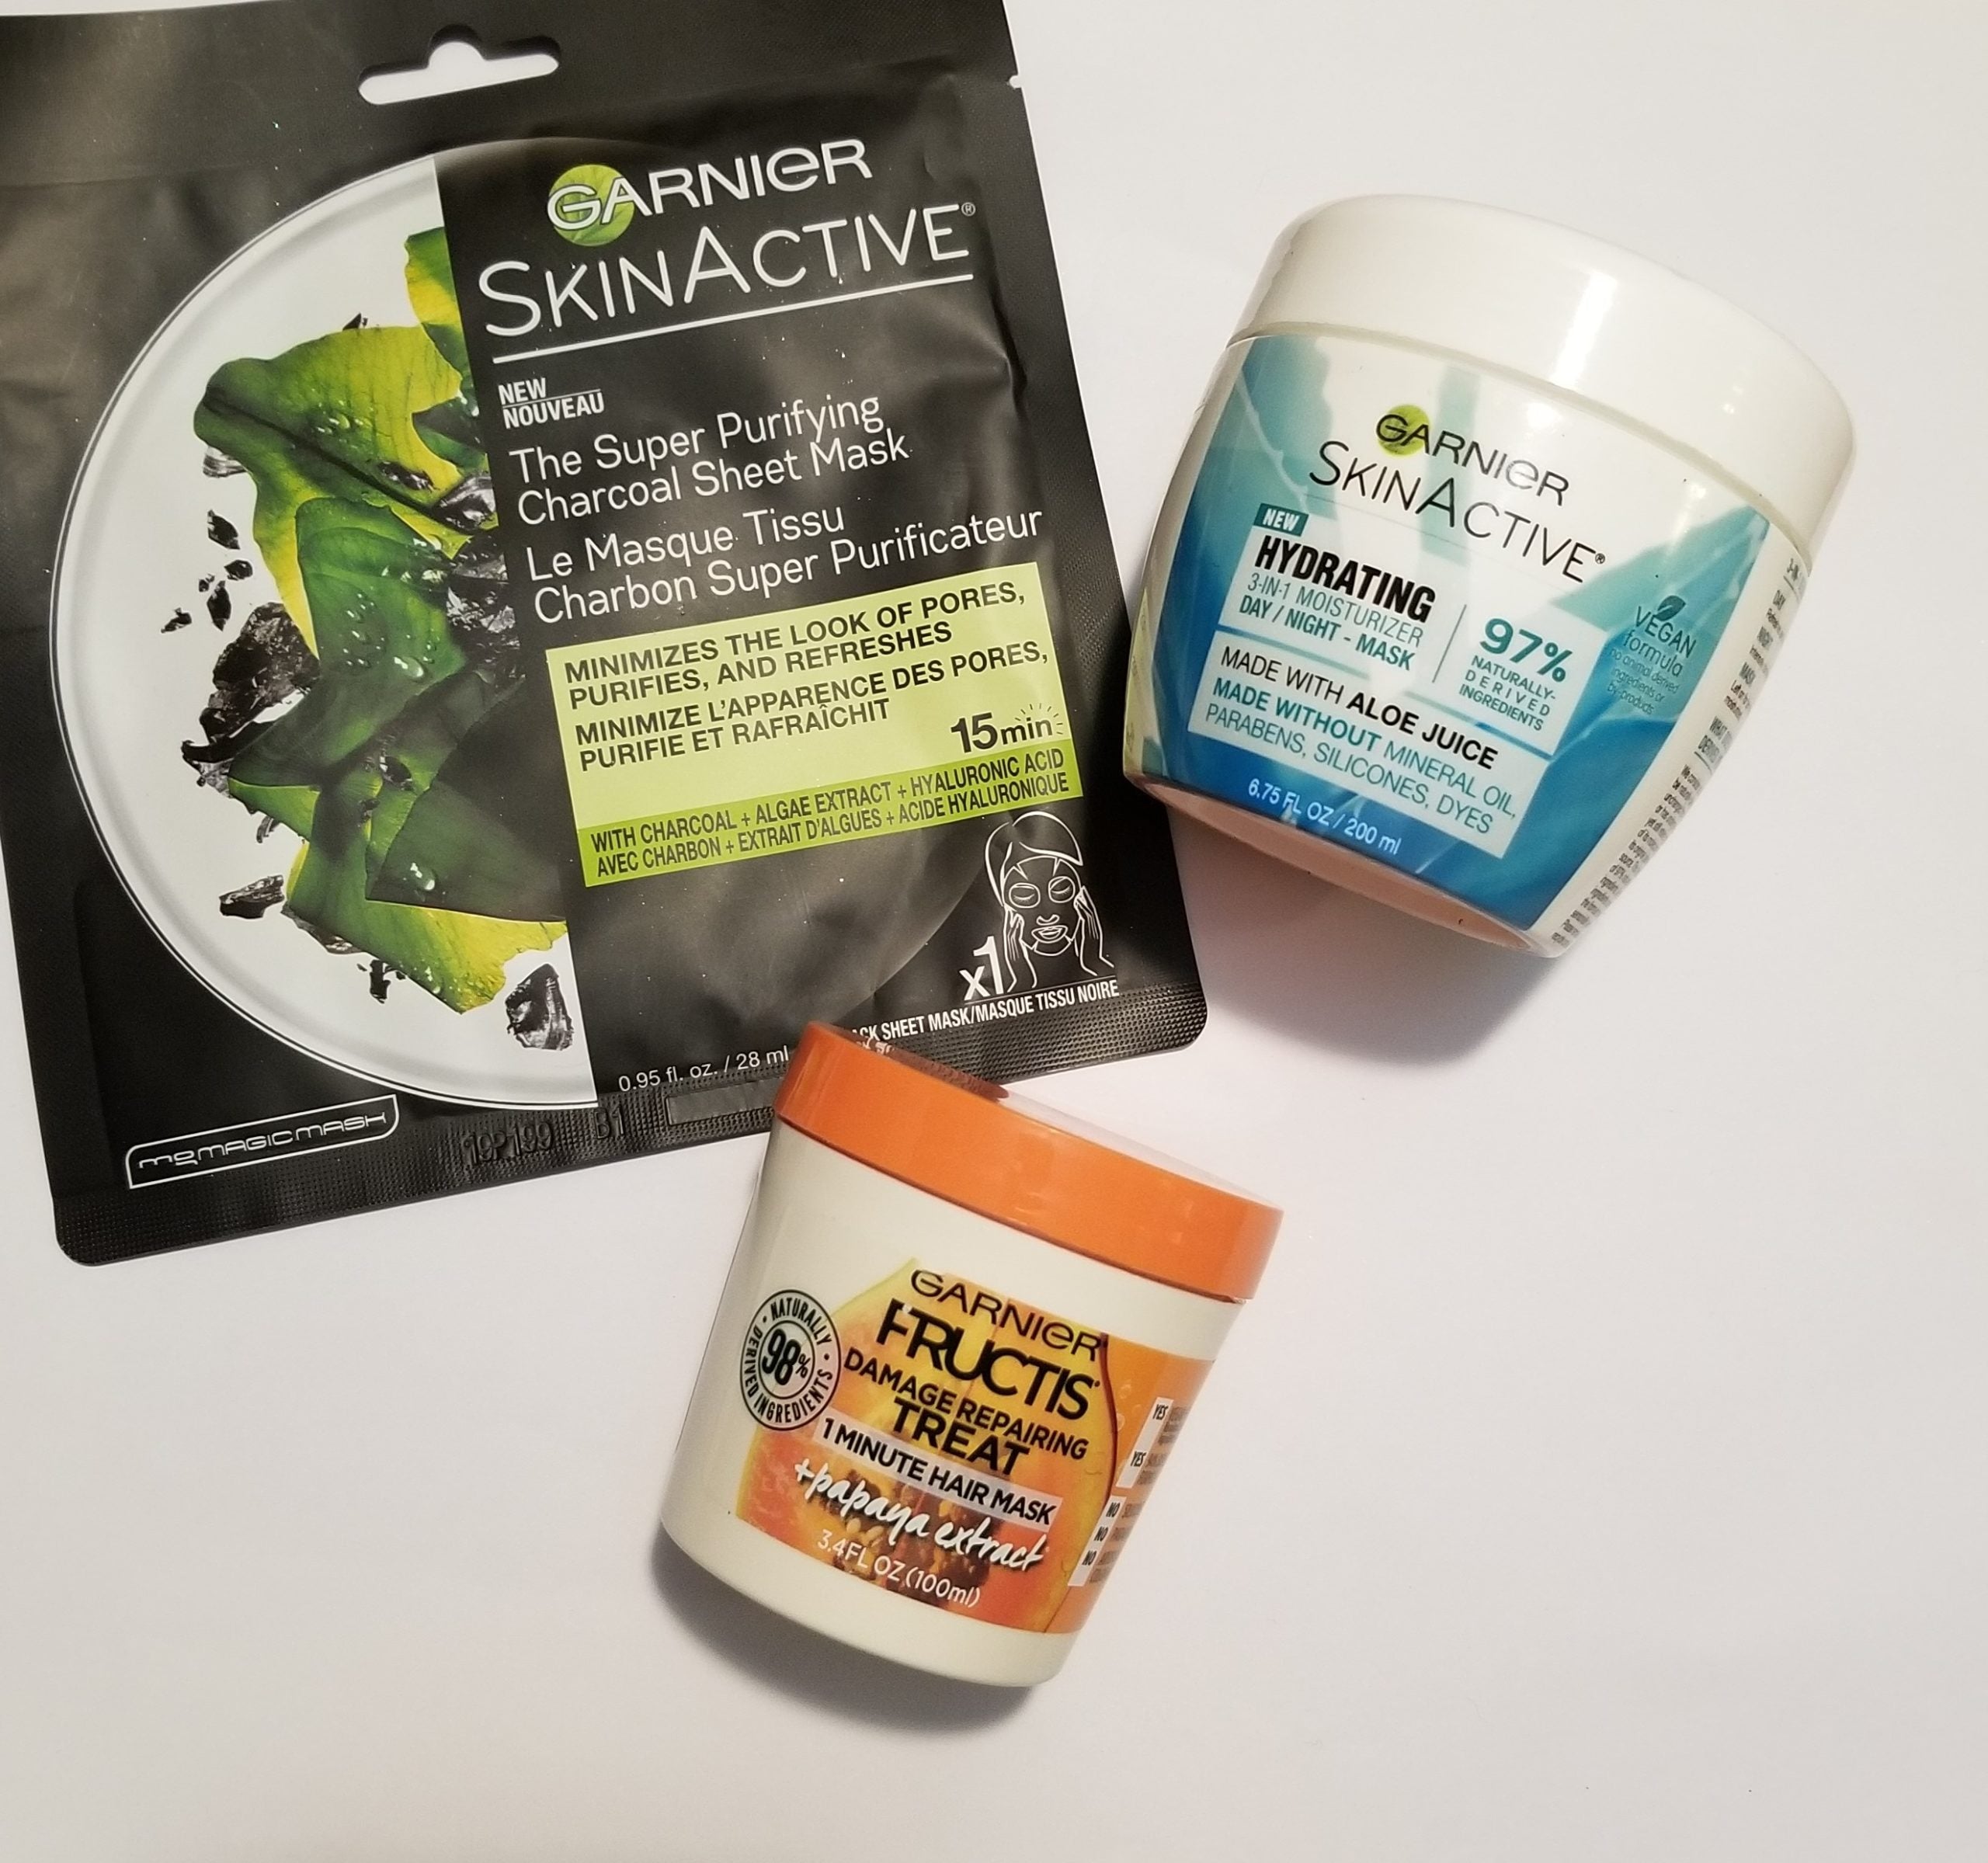 Review, Ingredients, Photos, Swatches, Skincare Trend 2018, 2019: Garnier SkinActive Hydrating 3-in-1 Moisturizer, Super Purifying Charcoal Sheet Mask, 1-Minute Hair Mask